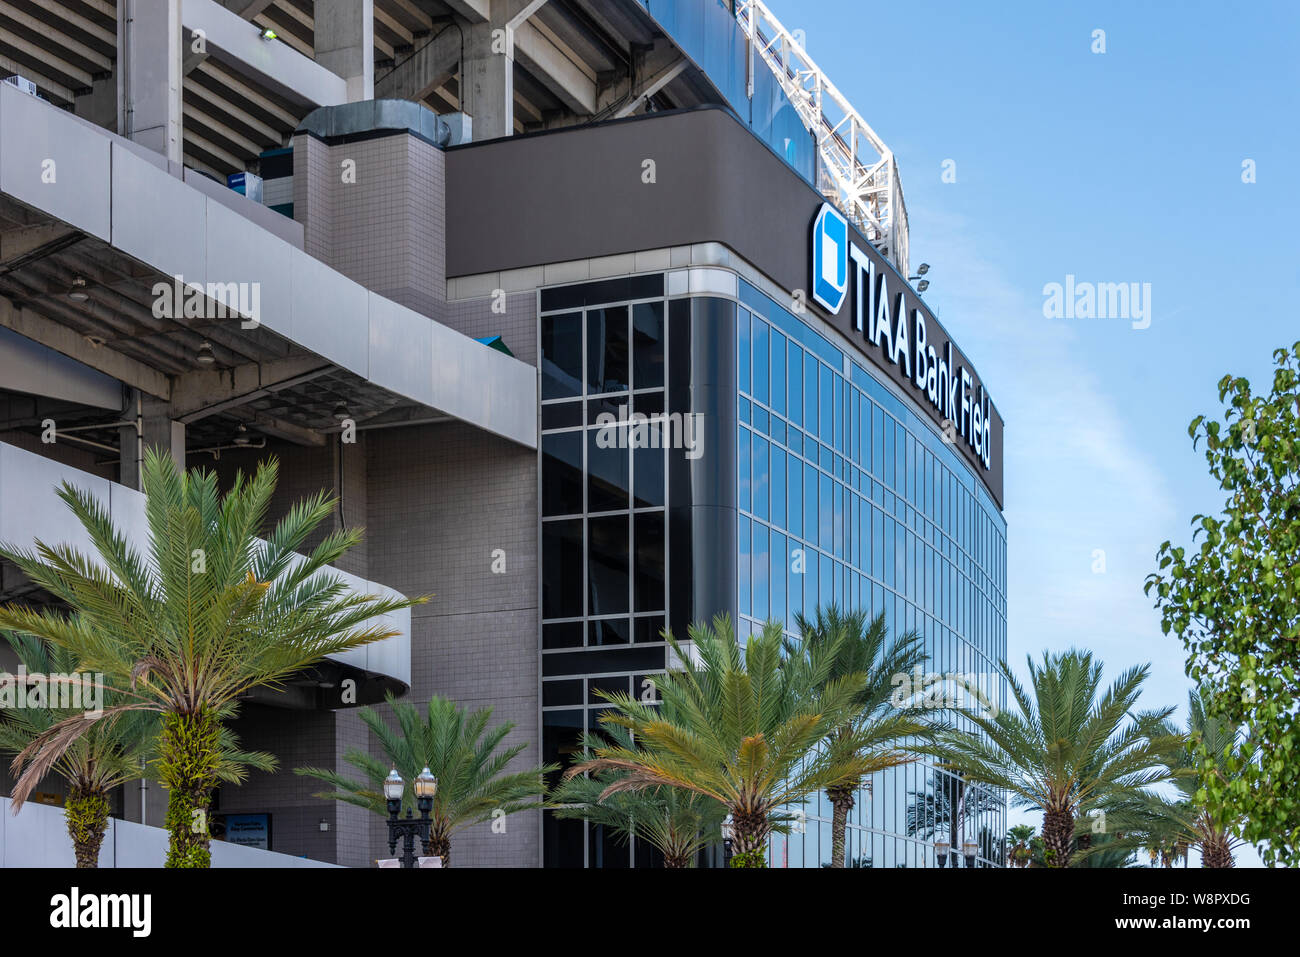 TIAA Bank Field in Jacksonville, Florida is the home of the NFL's Jacksonville Jaguars, and is host to the NCAA Gator Bowl and Florida-Georgia Game. Stock Photo